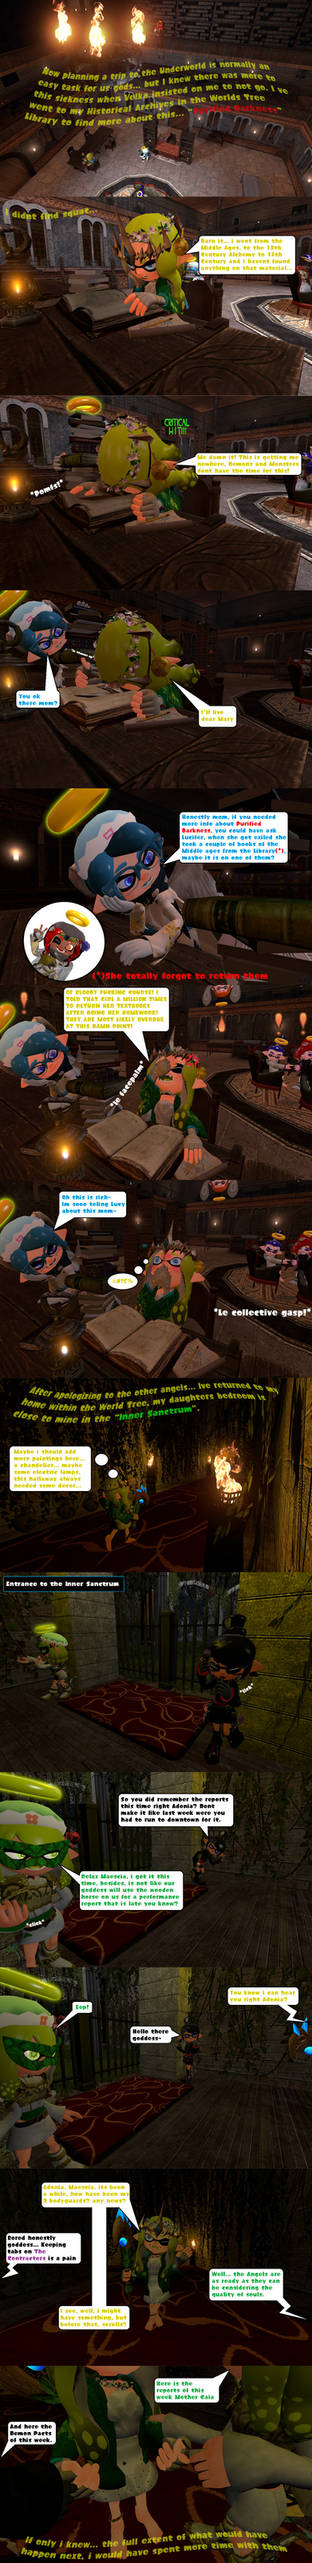 Gaia Suffering Page 12 - History Lesson -